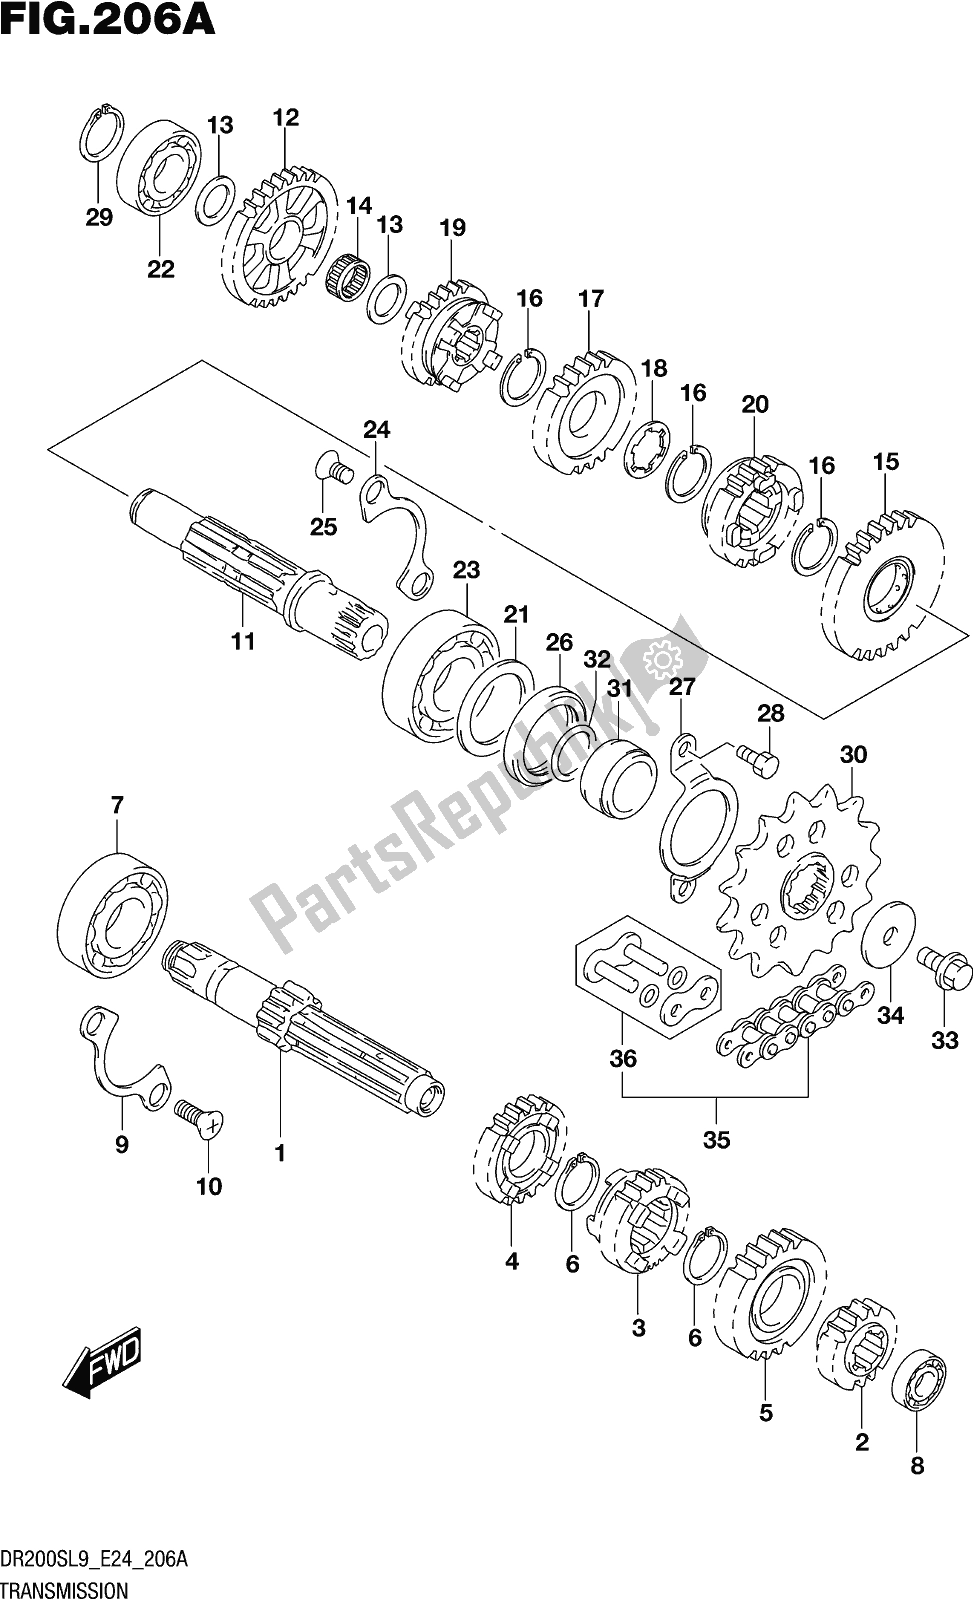 All parts for the Fig. 206a Transmission of the Suzuki DR 200S 2019